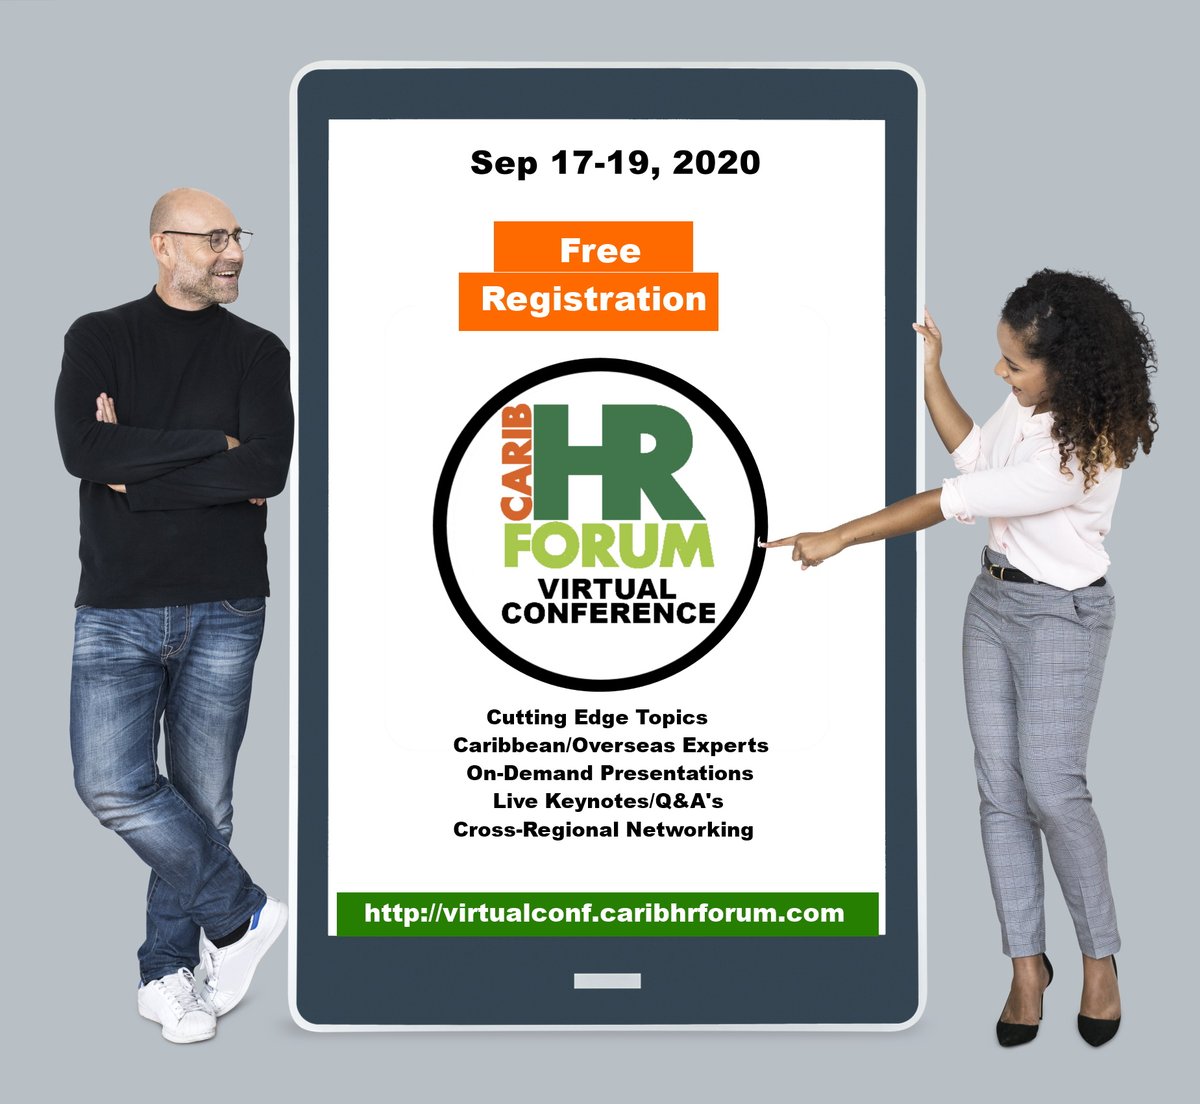 Join us for a first - a region-wide HR Conference with over 50 speakers. virtualconf.caribhrforum.com #caribhrforum #caribhrforumvirtconf2020 #hrmatt #hrmaj #hrmab #cishrp